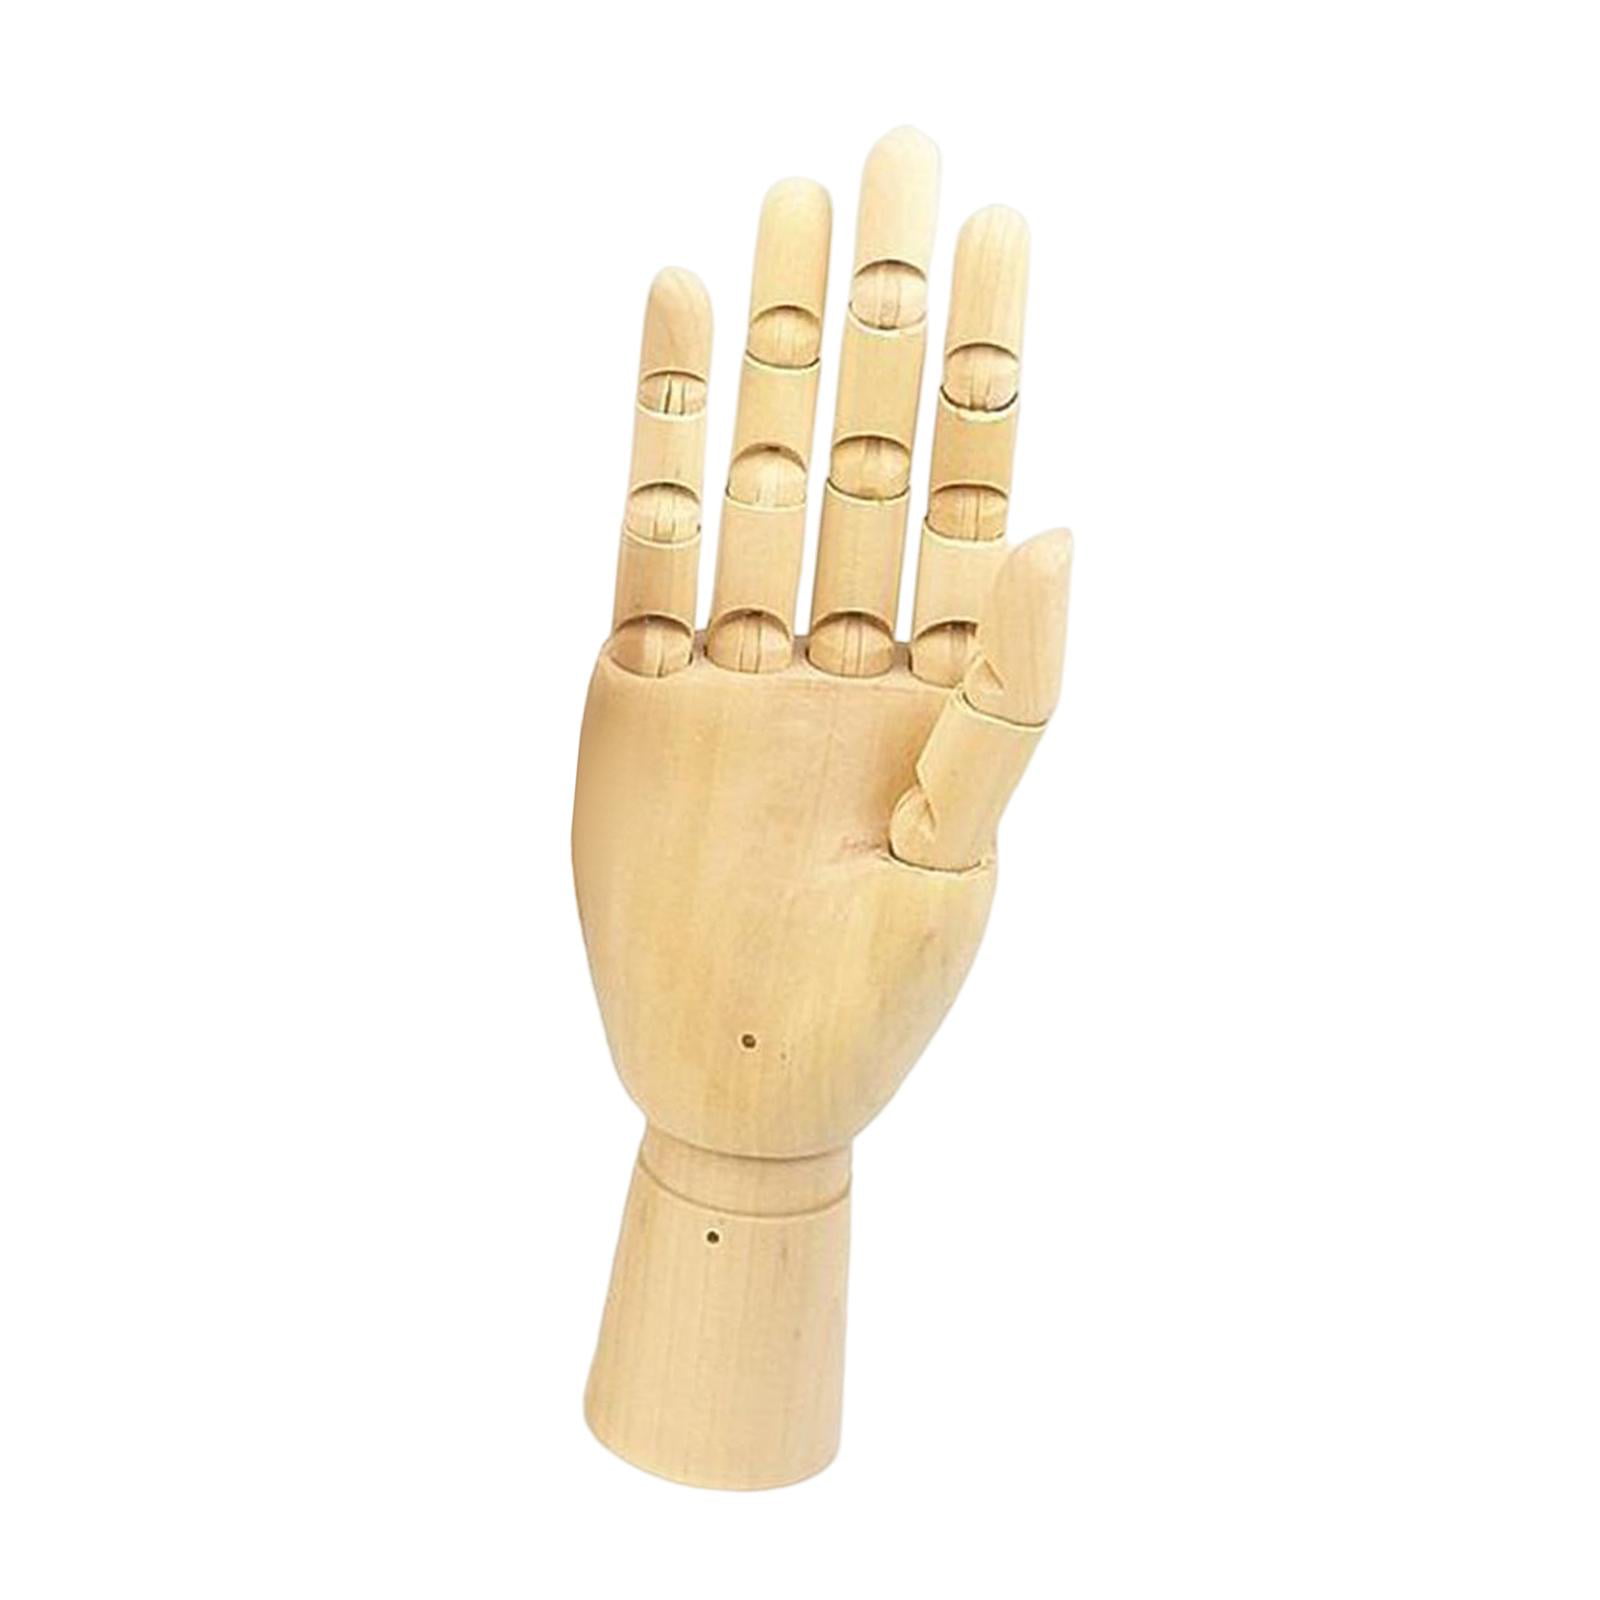 Manikin Hand  Lightweight Moveable Easy to Carry Multipurpose Art  Mannequin Hand for Sketching Art Supplies Home Office Decoration Black